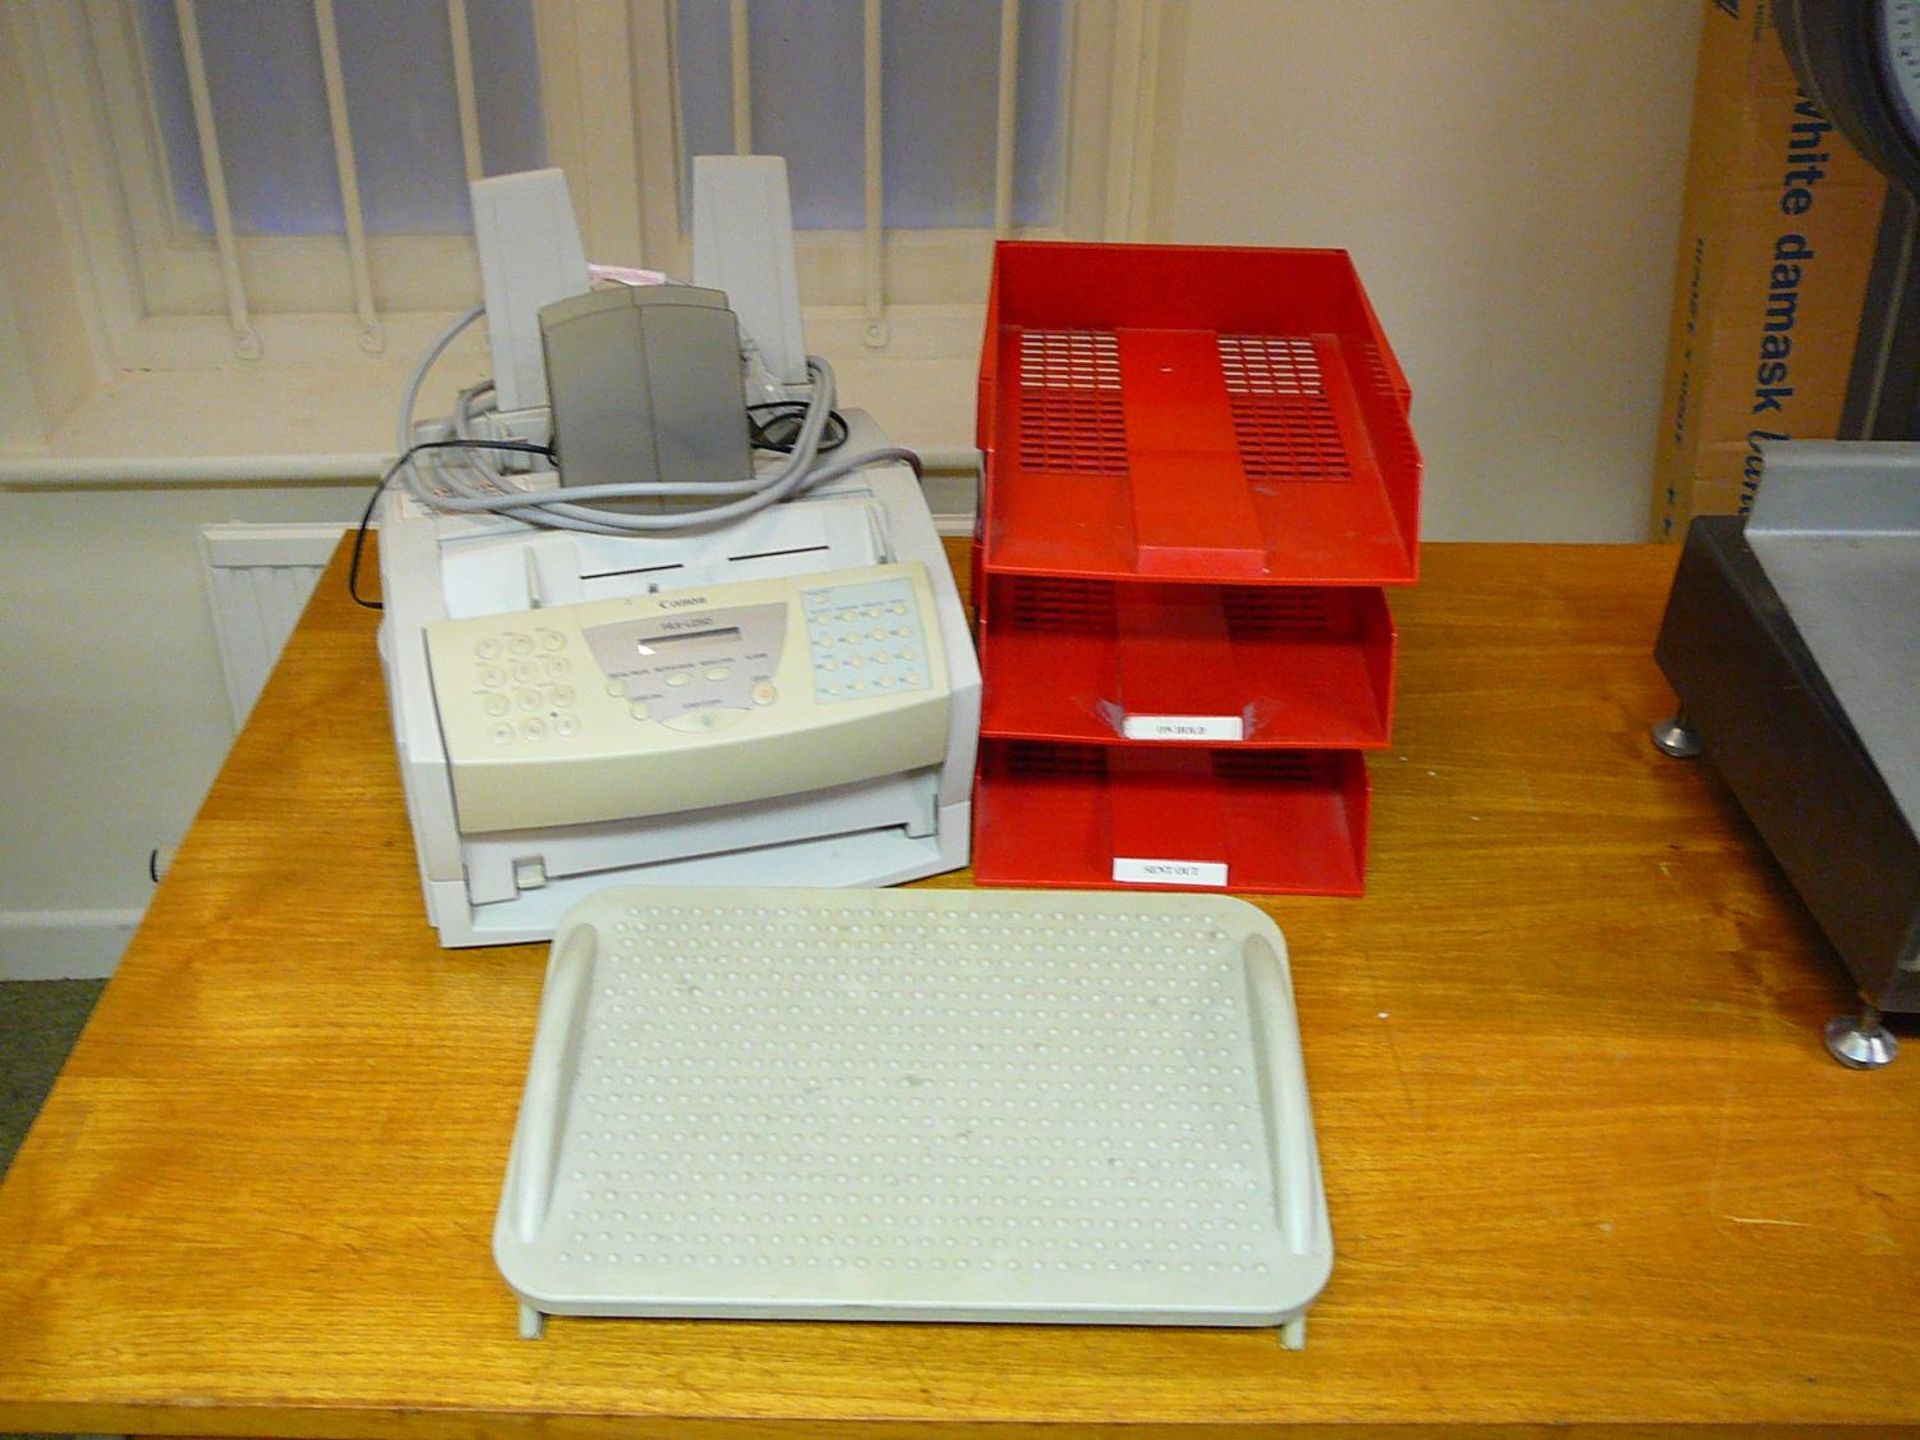 Canon fax machine and office sundries